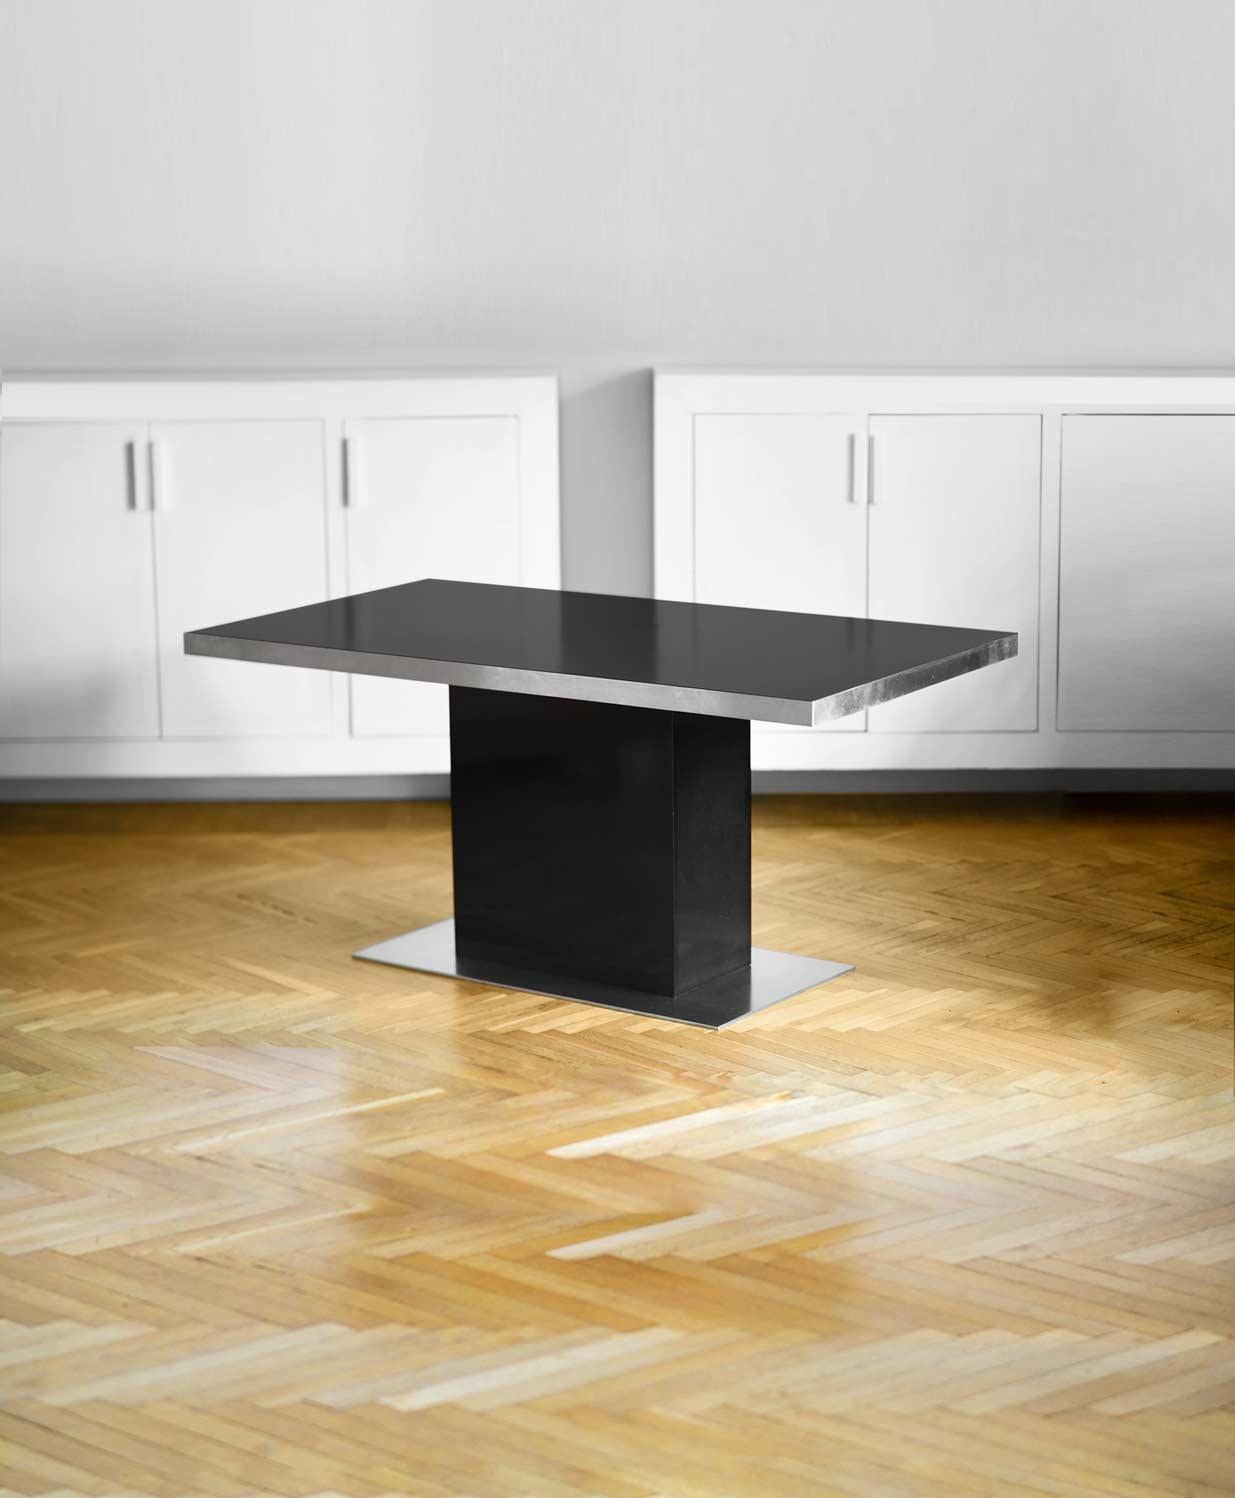 70s Dining table in black lacquered wood and satin metal.
Dimensions: 169w x 76h x 90d cm
Materials: lacquered wood, satin metal.
Italian manufacture
Designed by Willy Rizzo ca 1970